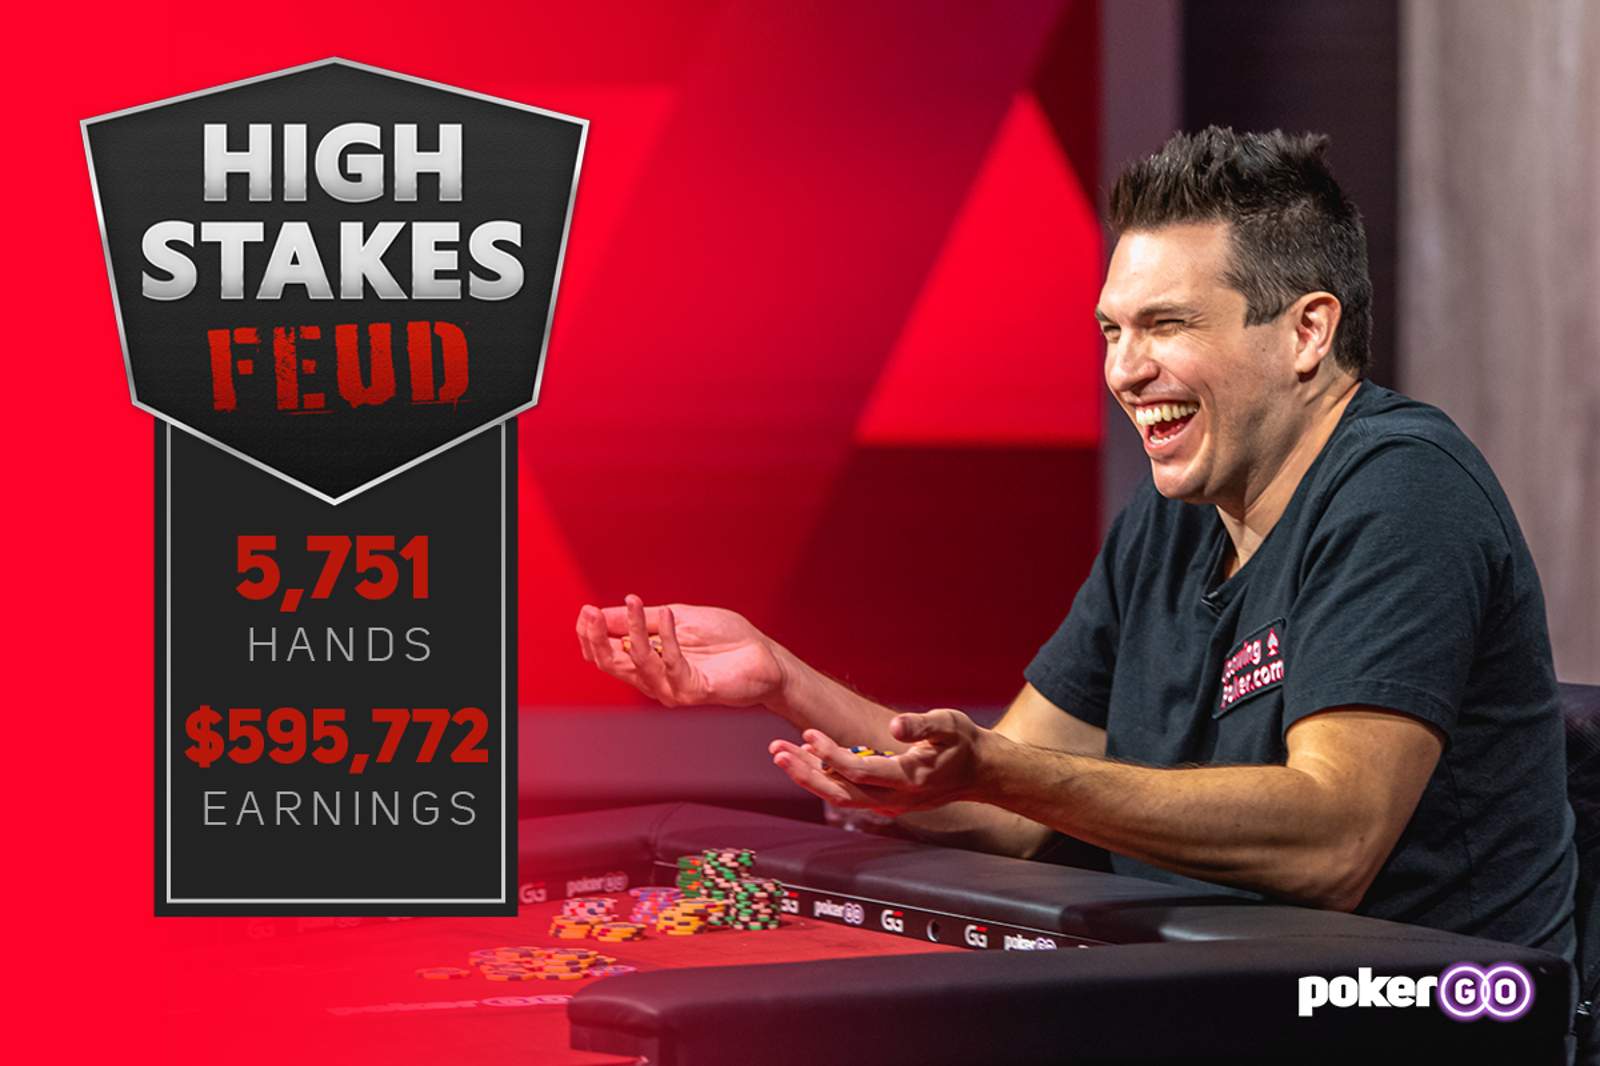 Doug Polk Leads Daniel Negreanu by $595,772 After 5,751 Hands in High Stakes Feud